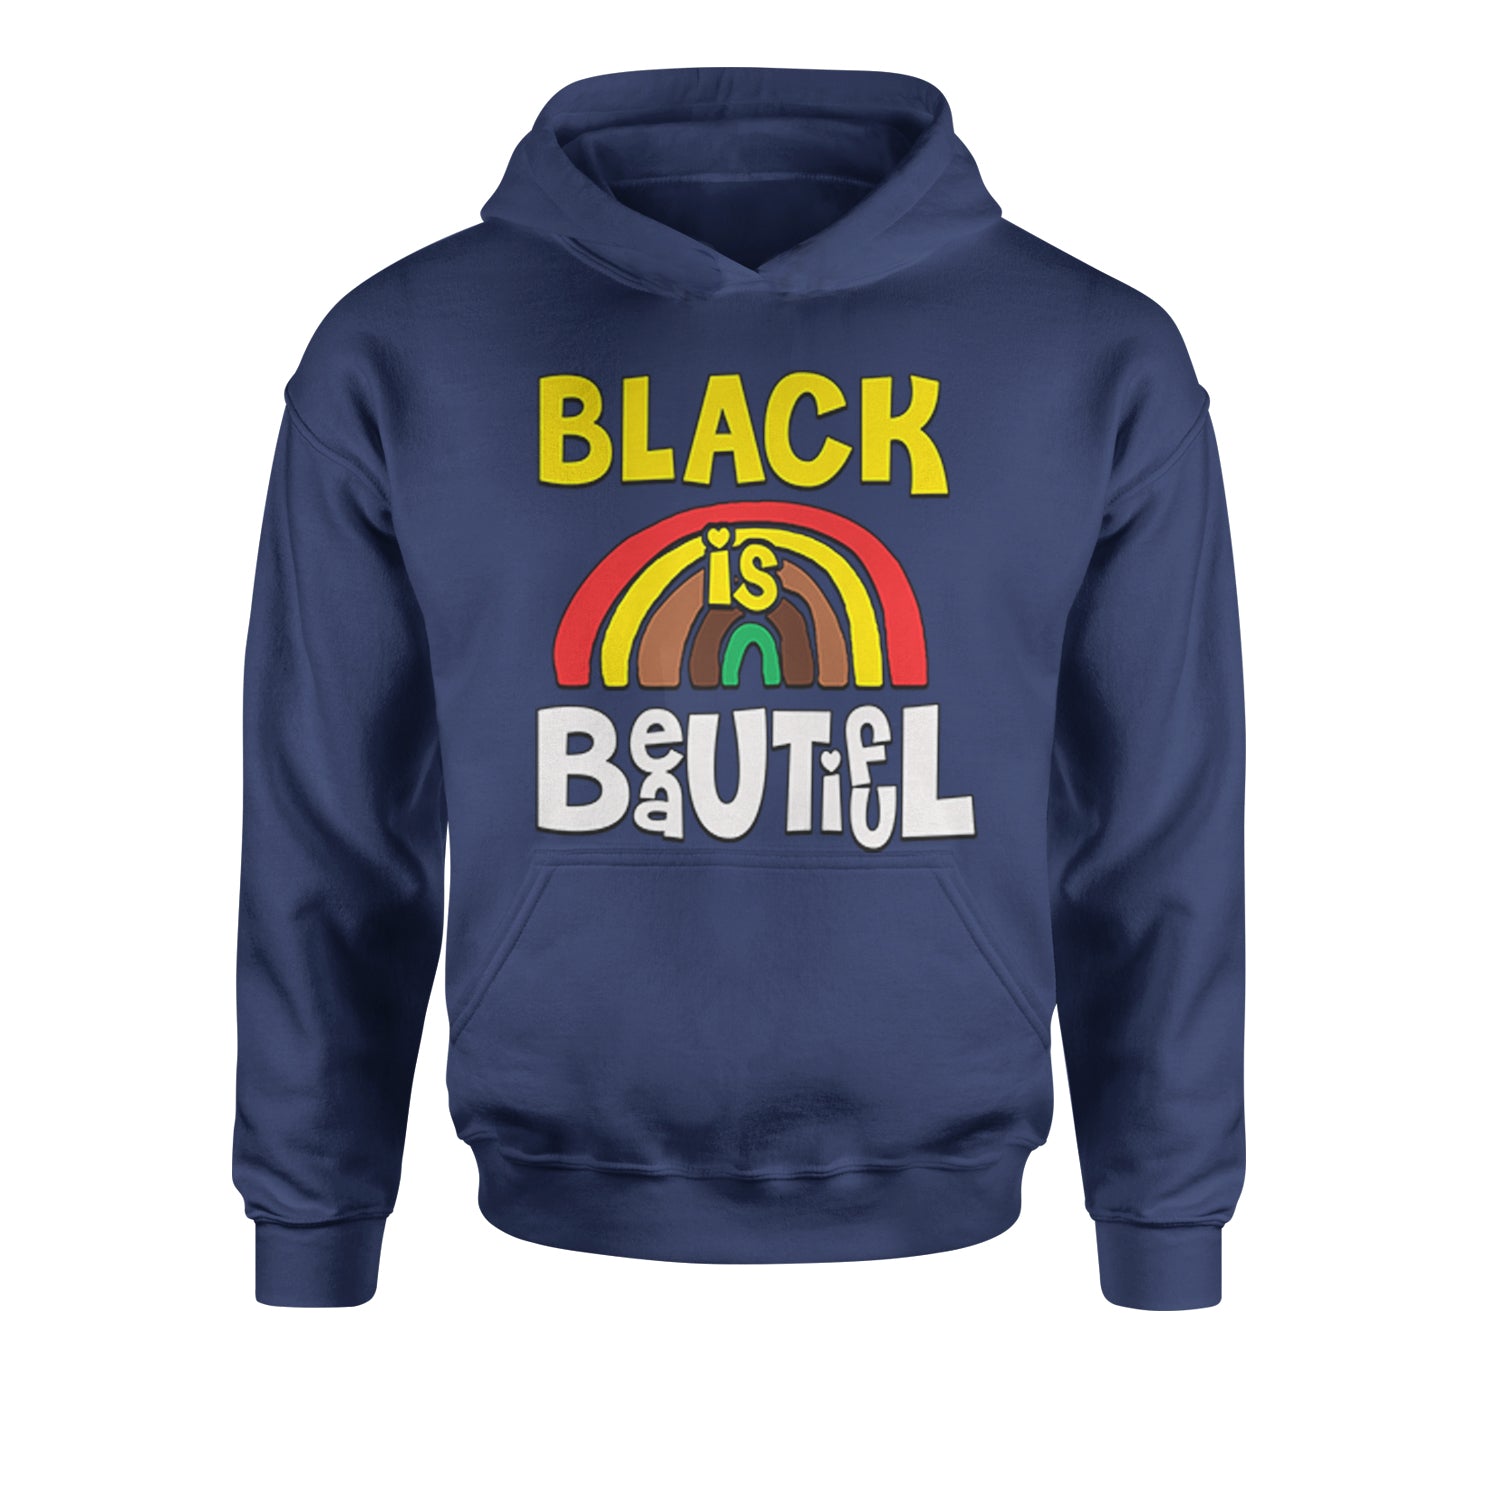 Black Is Beautiful Rainbow Youth-Sized Hoodie african, africanamerican, american, black, blackpride, blm, harriet, king, lives, luther, malcolm, march, martin, matter, parks, protest, rosa, tubman, x by Expression Tees